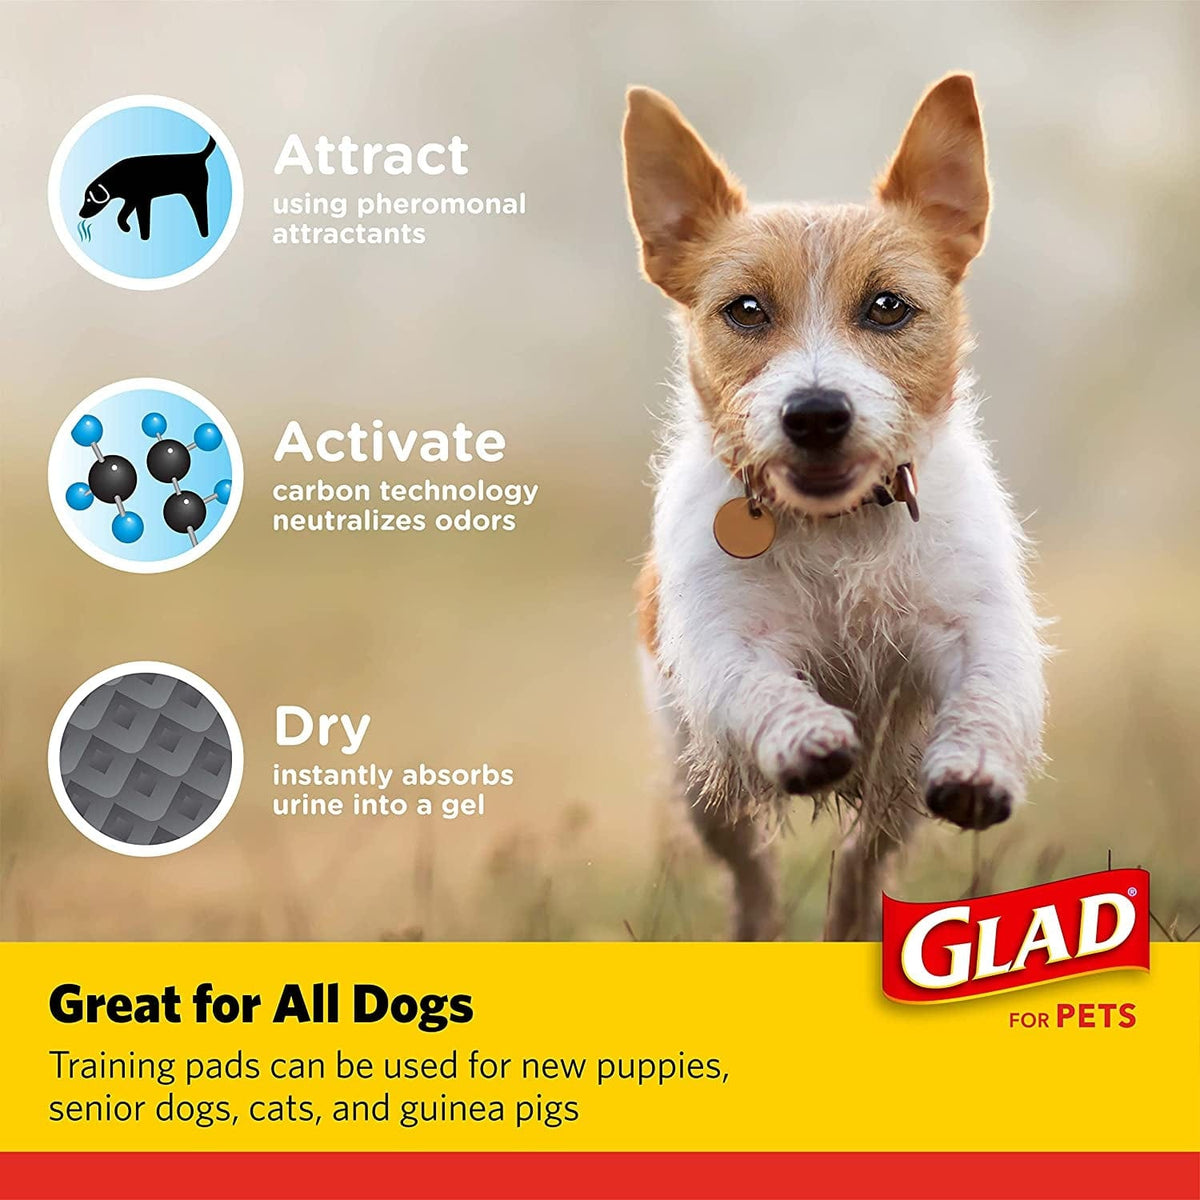 Glad for Pets Black Charcoal Puppy Pads | Puppy Potty Training Pads That ABSORB & NEUTRALIZE Urine Instantly | New & Improved Quality Puppy Pee Pads, 50 Count